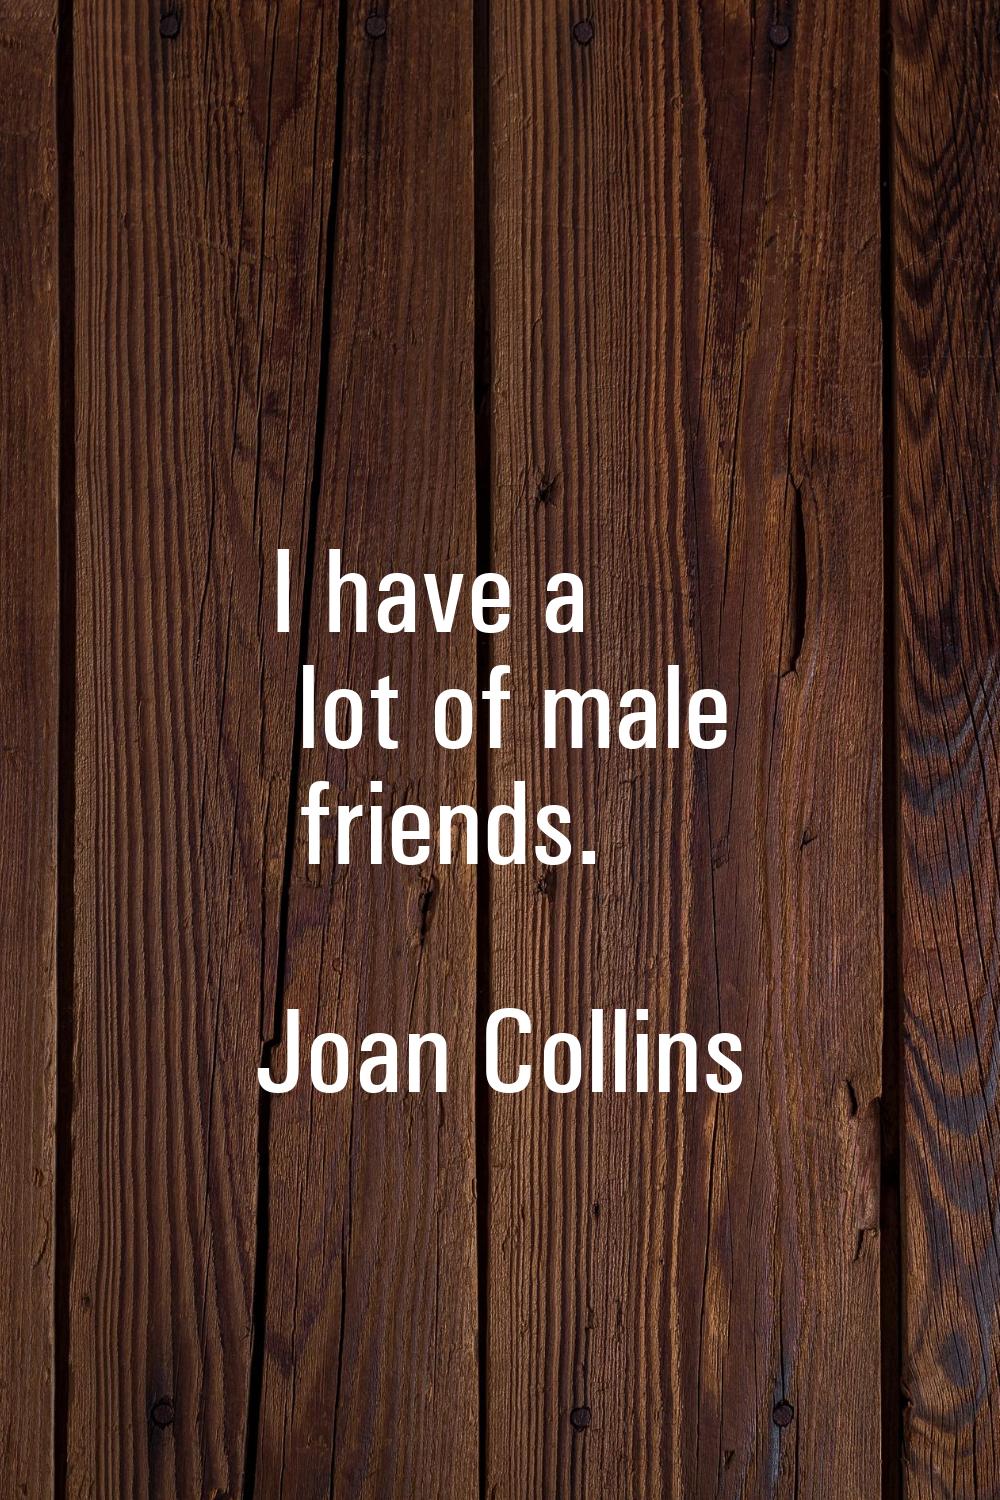 I have a lot of male friends.